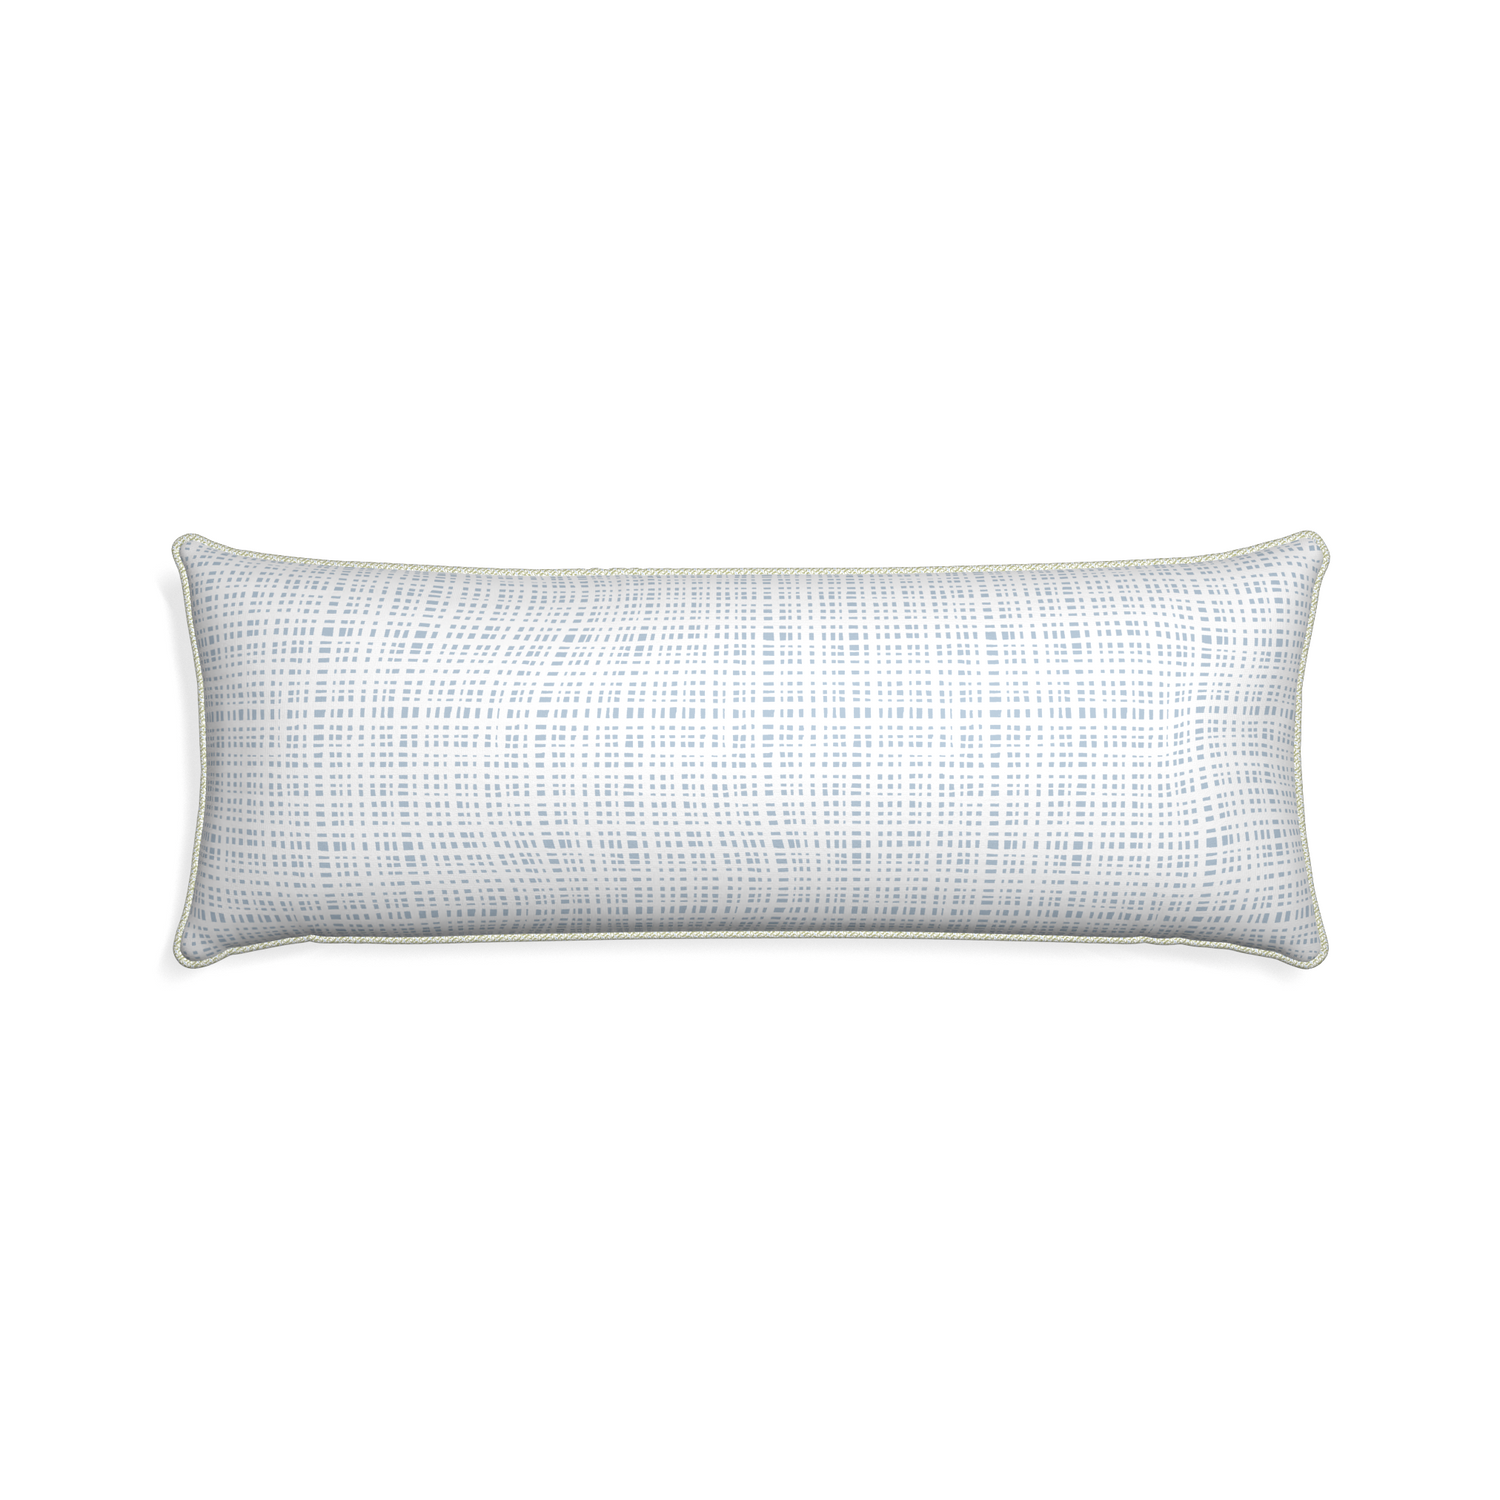 Xl-lumbar ginger sky custom pillow with l piping on white background